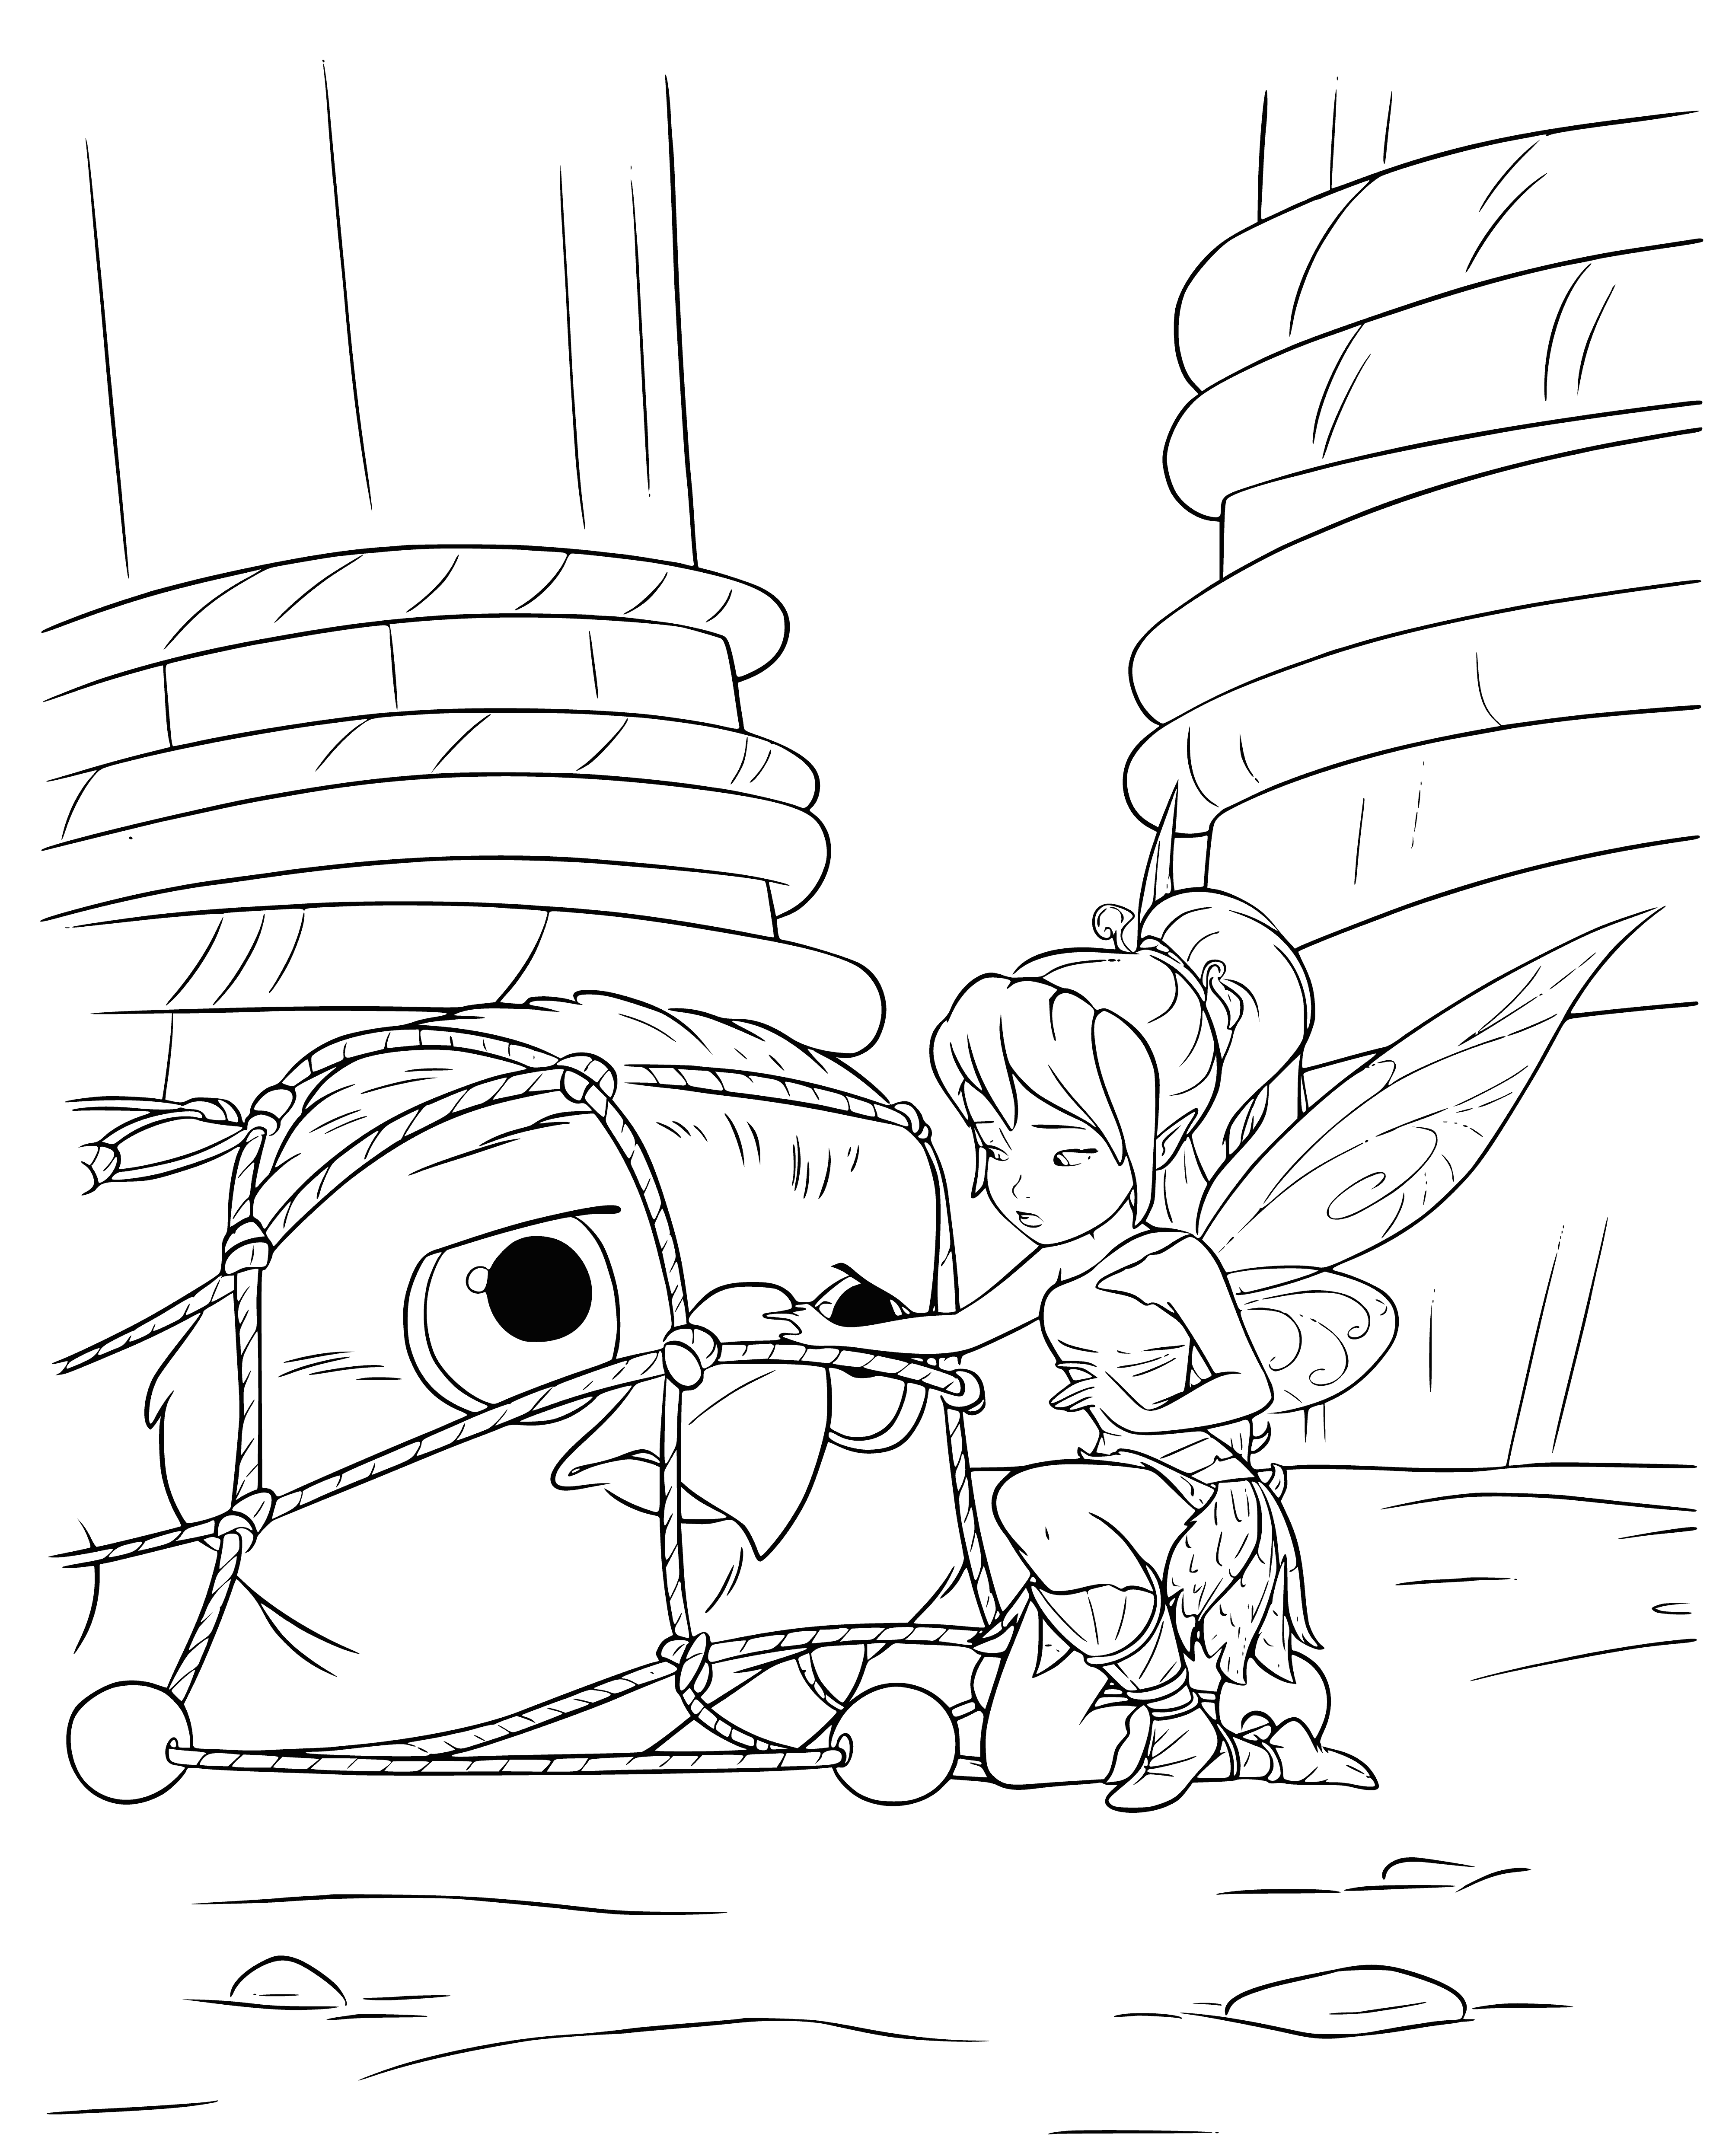 coloring page: Two small fairy scouts hold a large, concerned hawk chick in a grassy meadow with flowers.